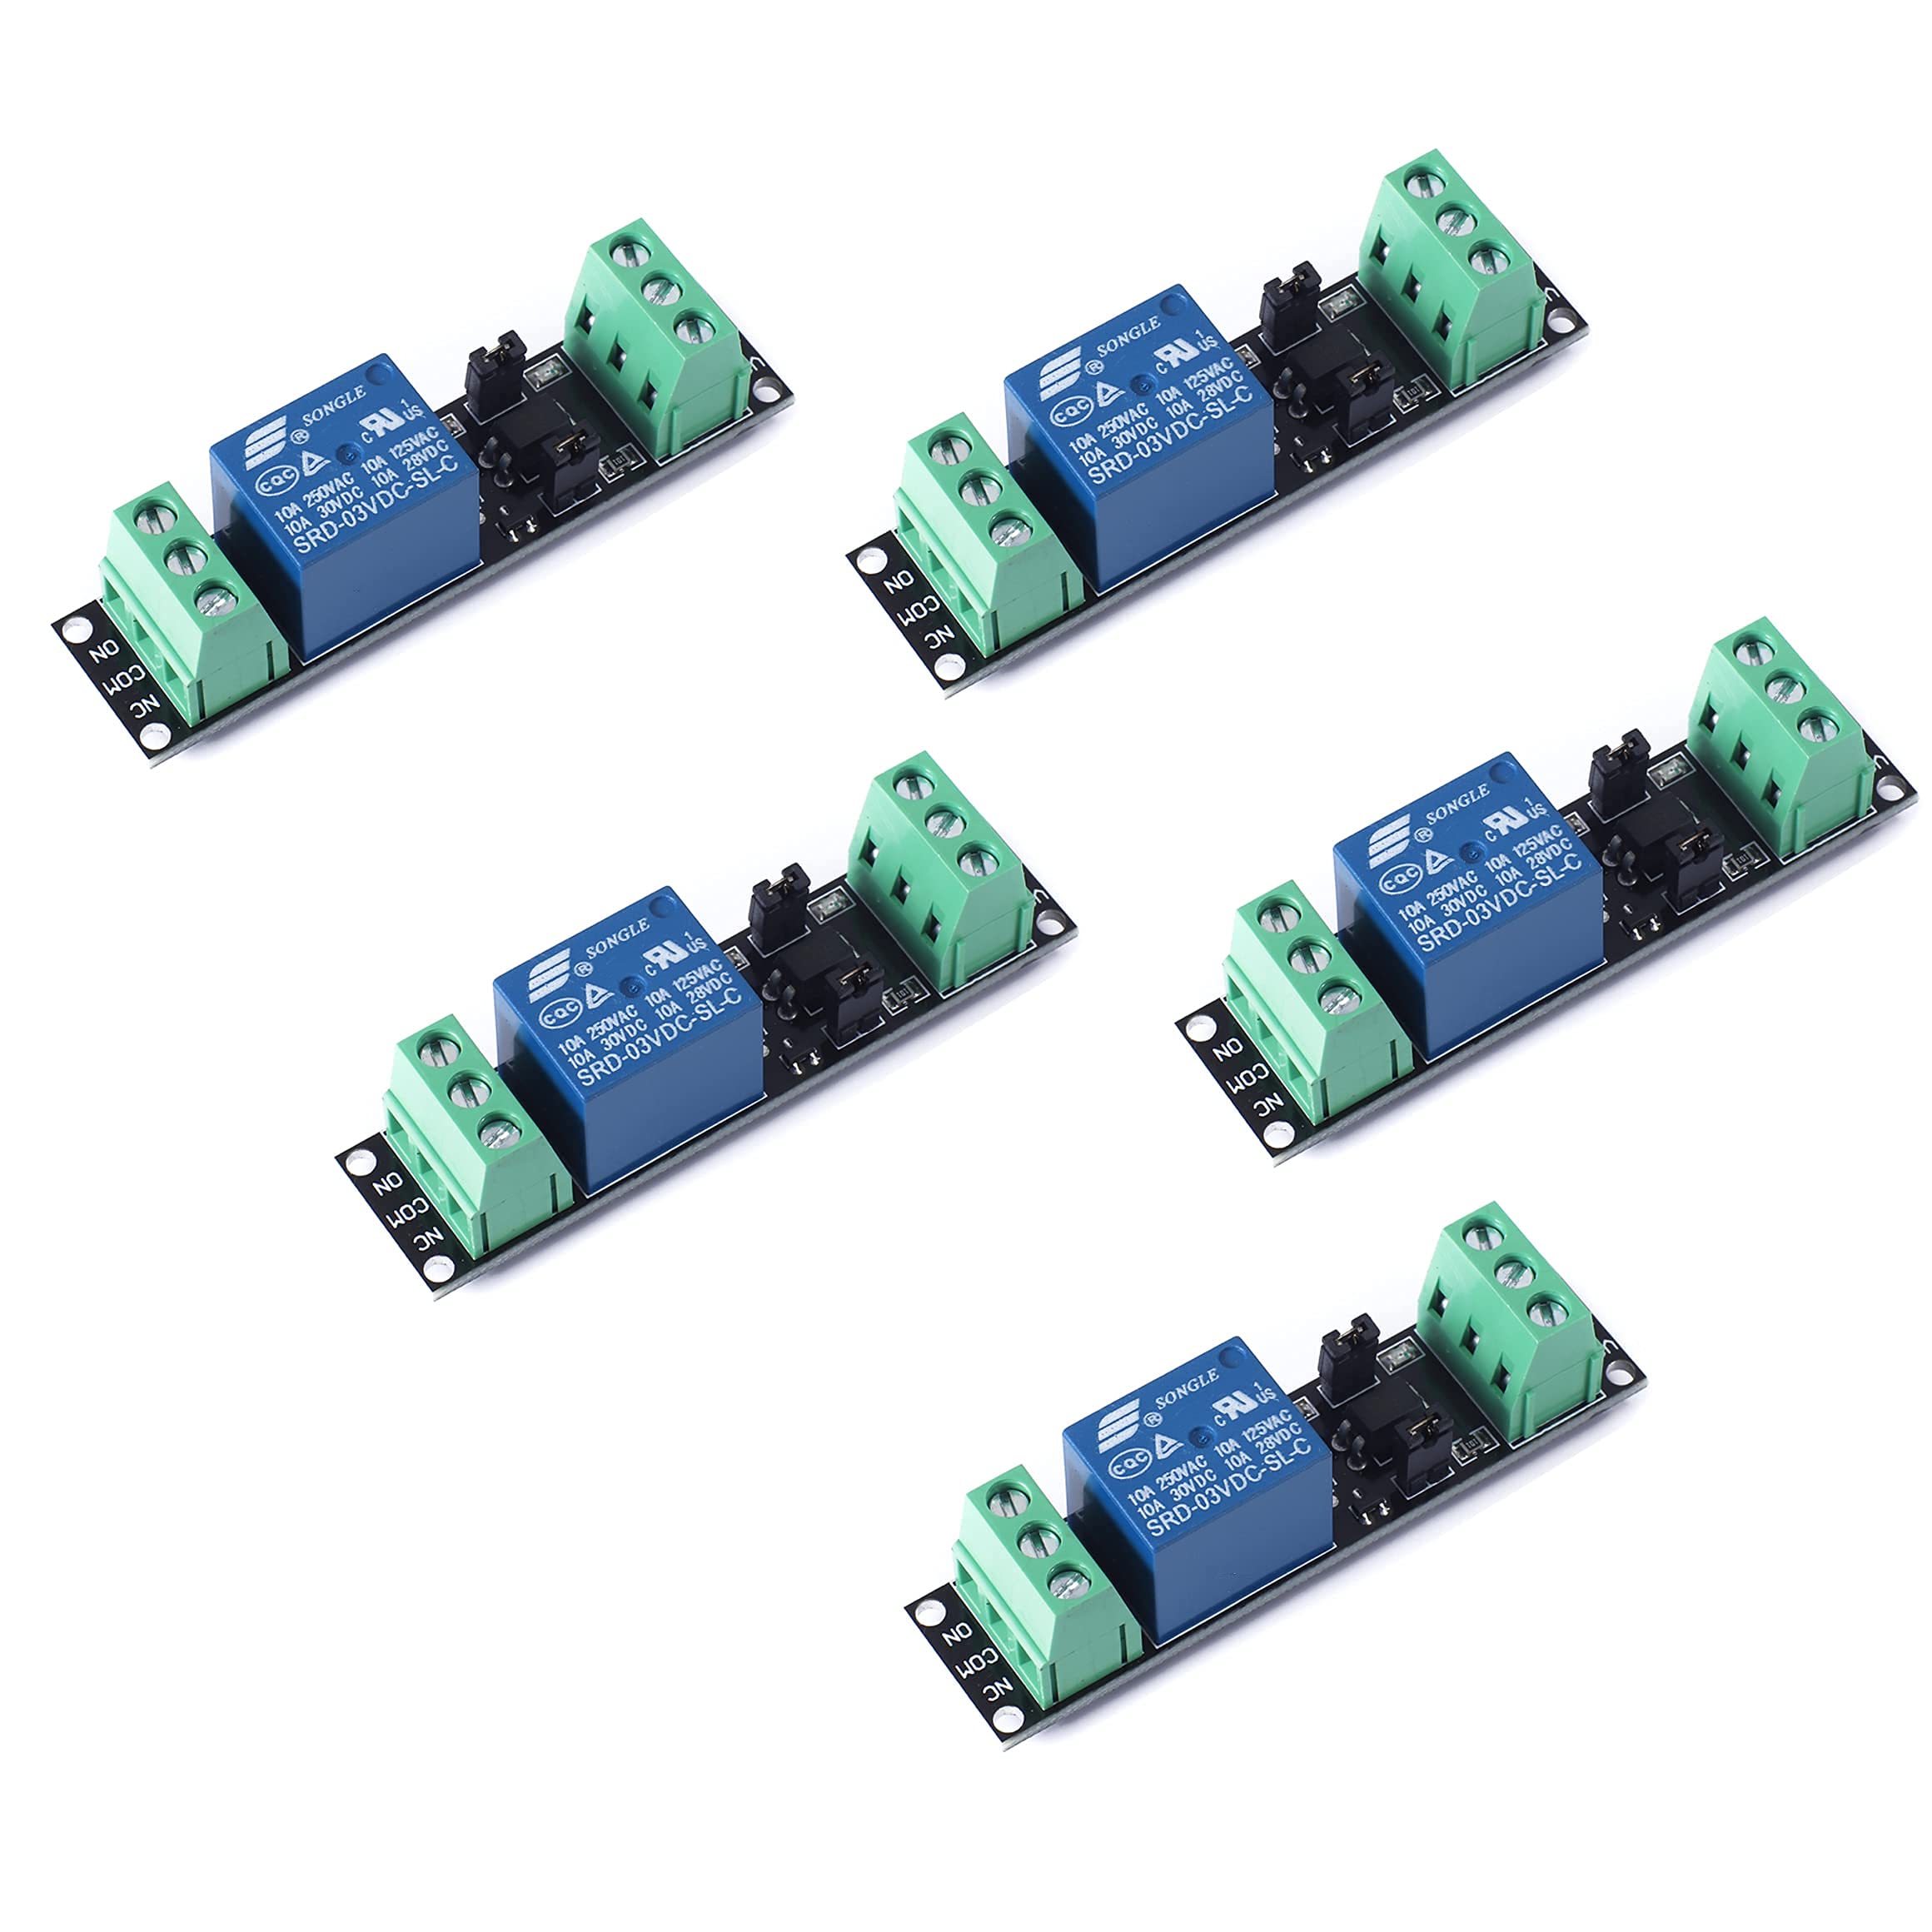 Teyleten Robot DC 1 Channel Optocoupler 3V/3.3V Relay High Level Driver Module Isolated Drive Control Board 3V/3.3V Relay Module for Arduino (Pack of 5)